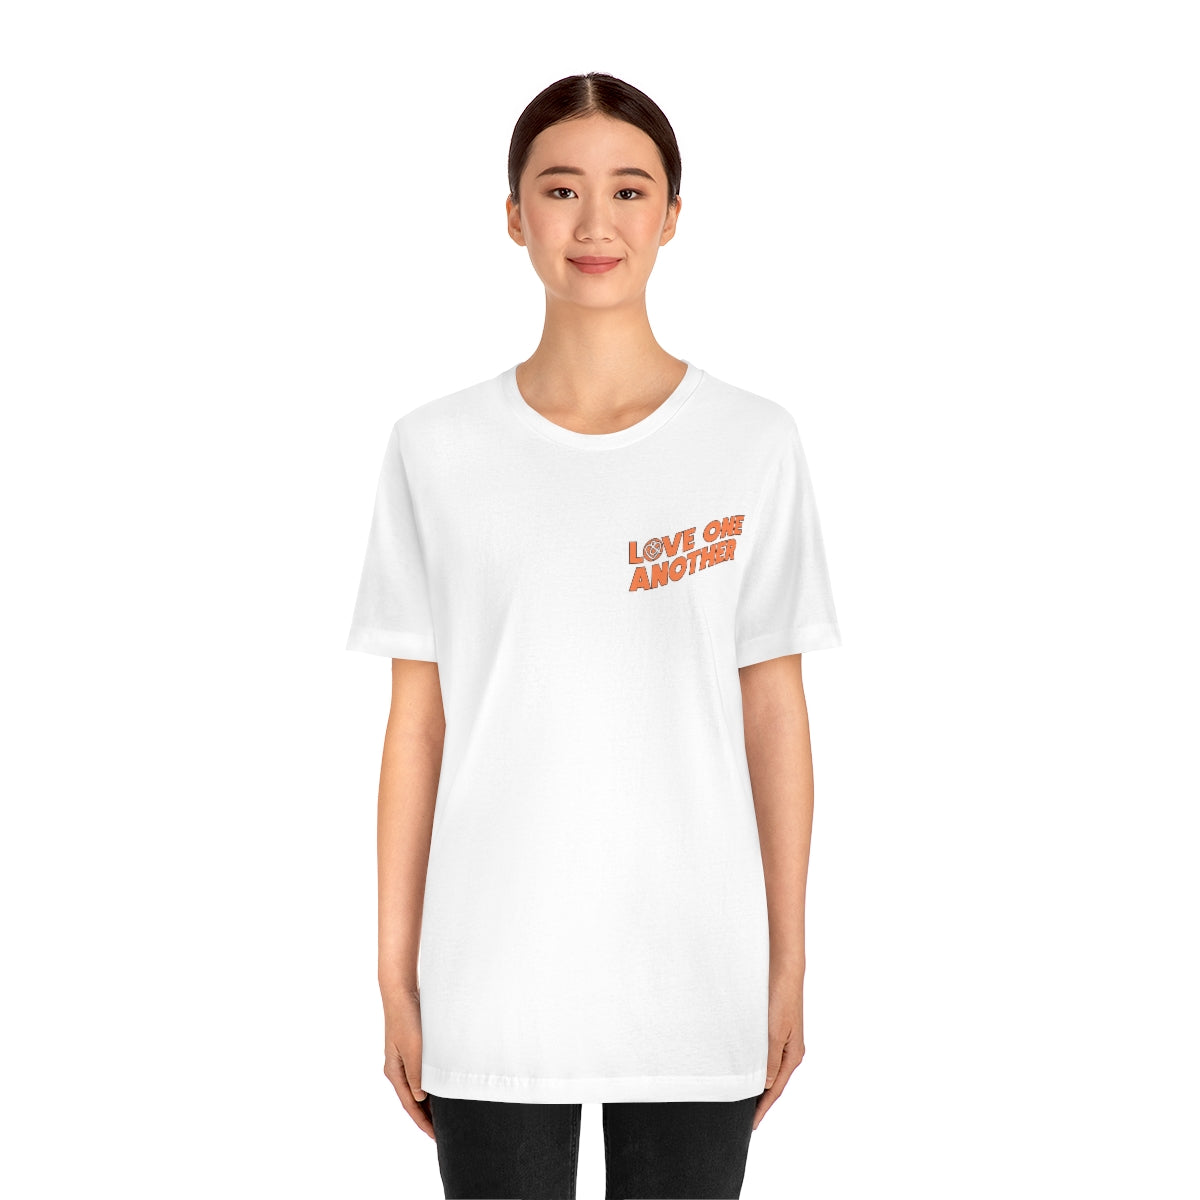 Love One Another - Unisex Short Sleeve Tee